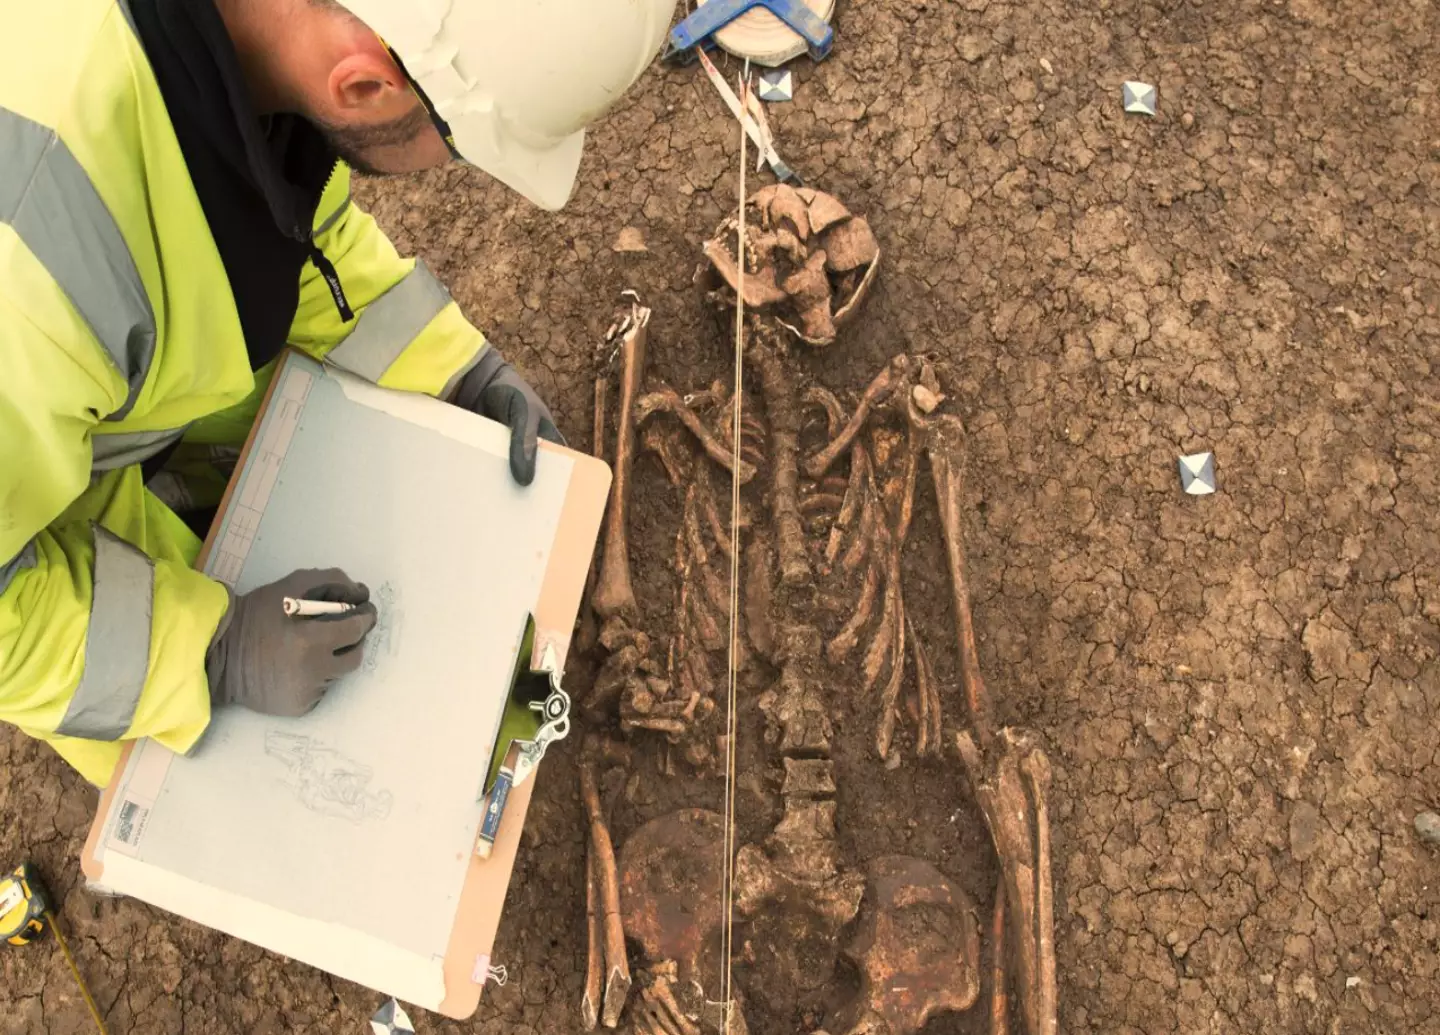 The graves of three men were found buried in Cambridgeshire.